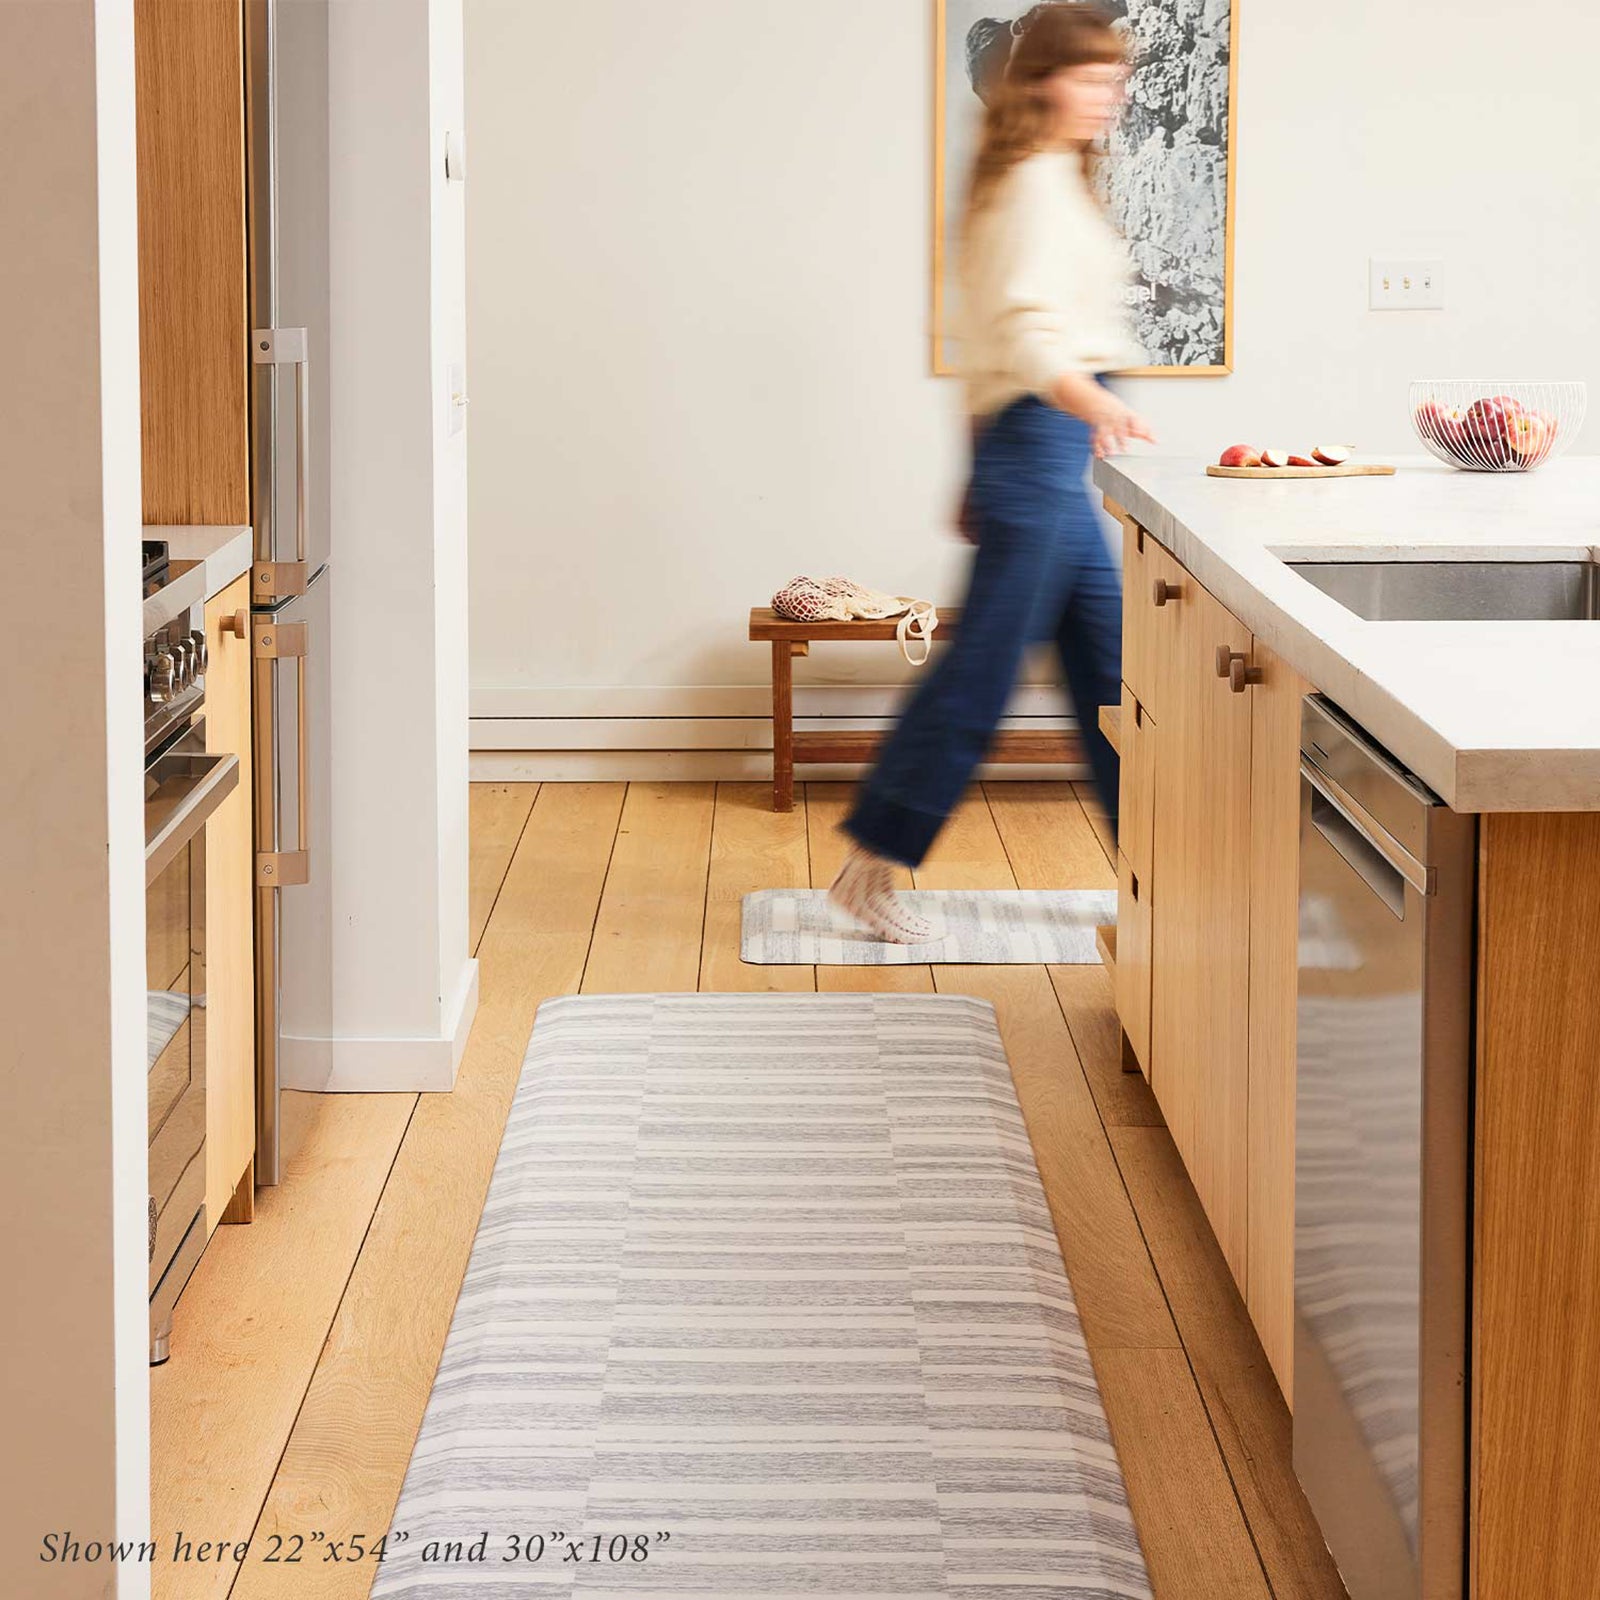 Sutton stripe heather gray and white inverted stripe standing mat shown in light wood tone kitchen in sizes 22x54 and 30x108 with woman walking past in the background